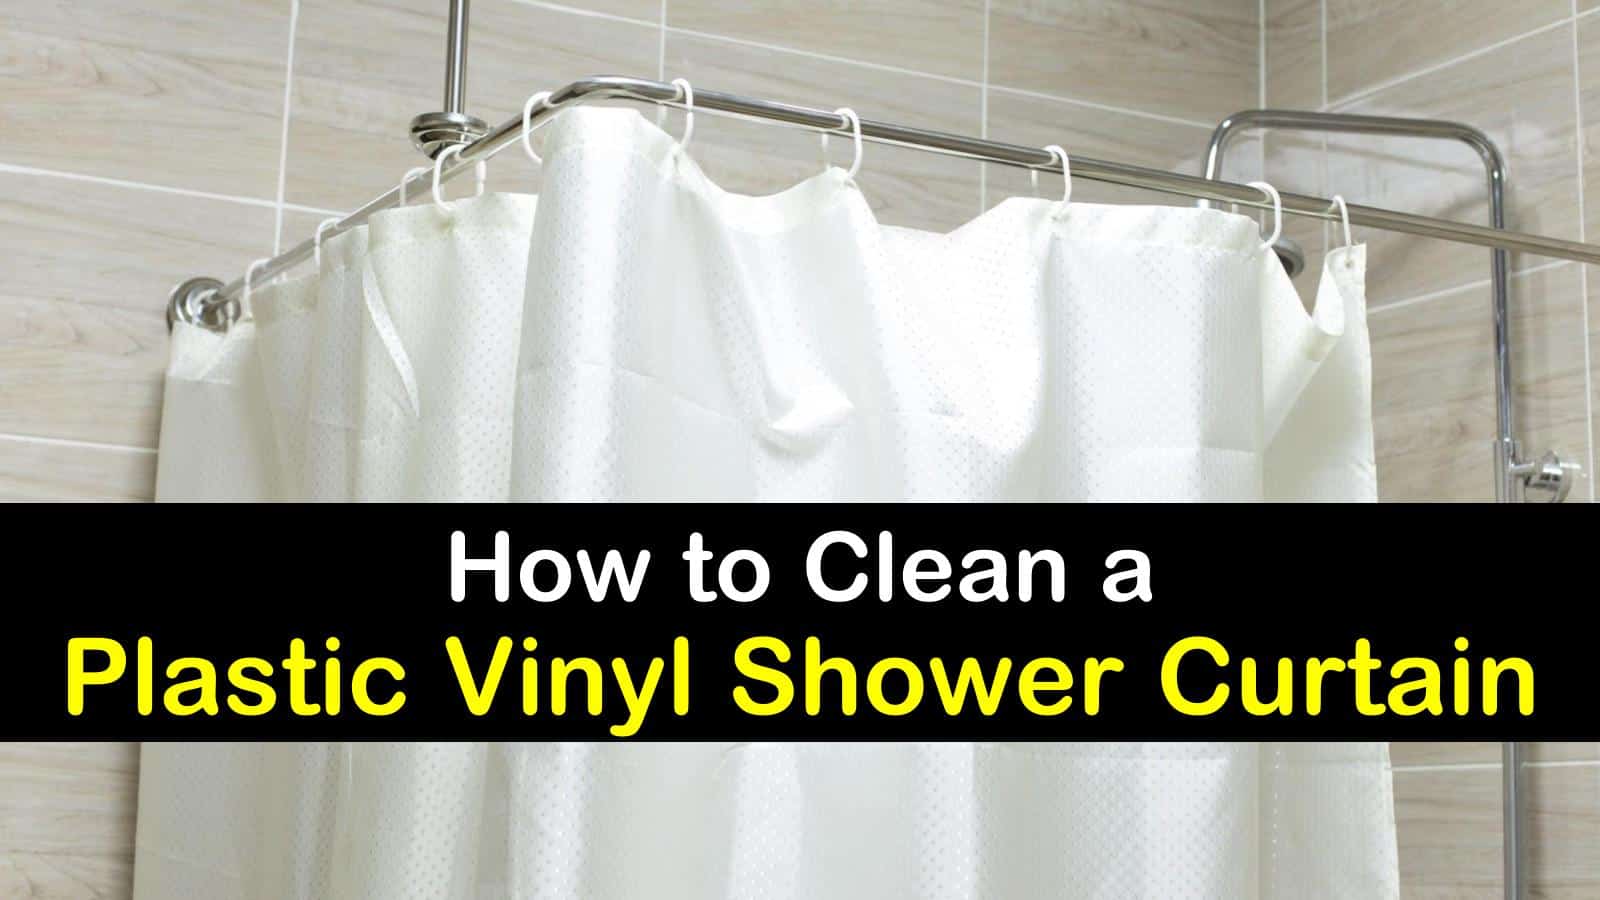 5 Excellent Ways To Clean A Shower Curtain, How To Clean Plastic Shower Curtain By Hand